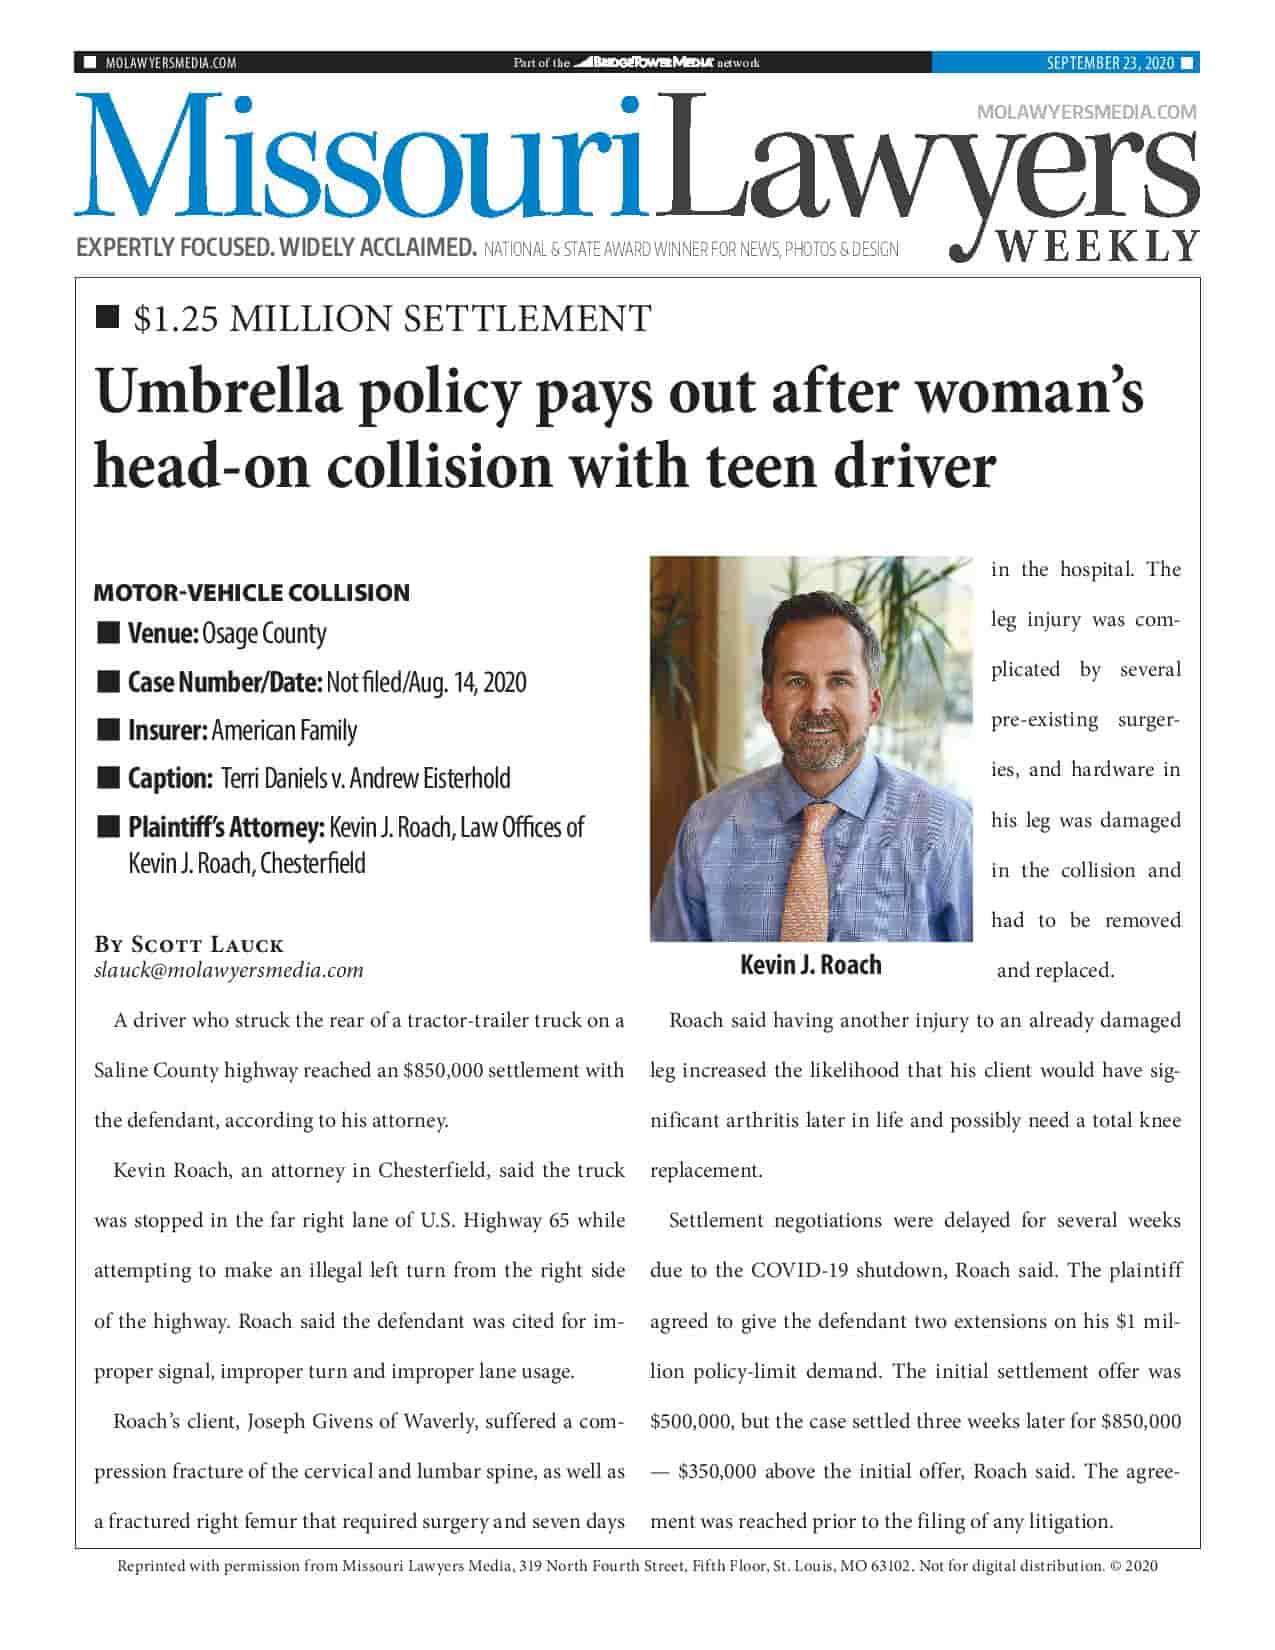 Umbrella policy pays out after woman's head-on collision...